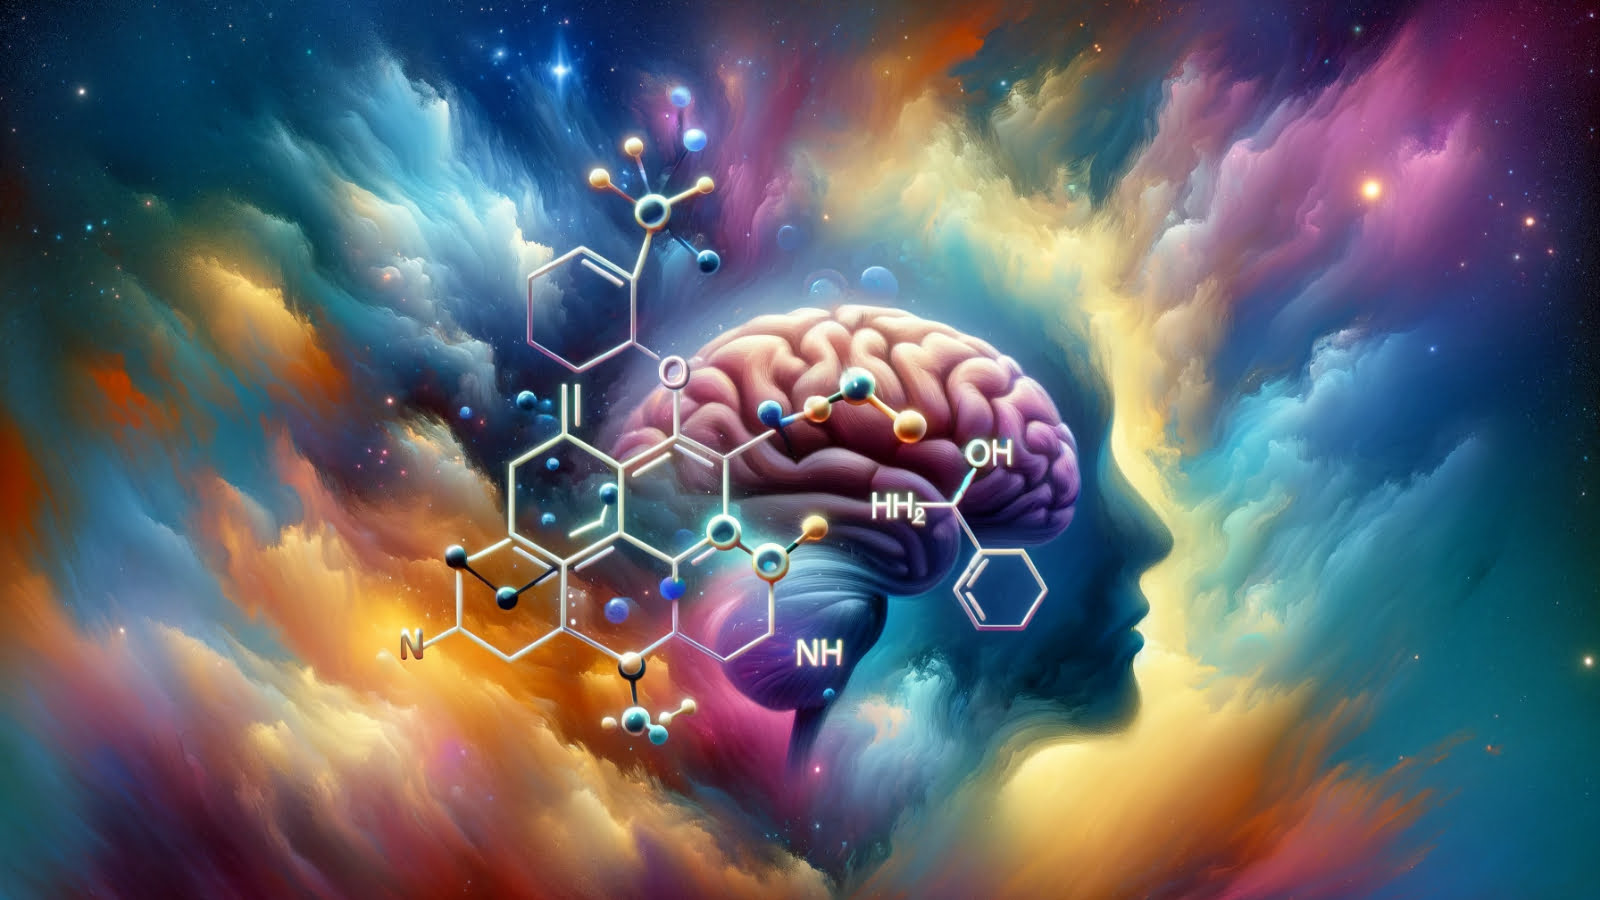 An exploration of Adderall's effects on dopamine levels, depicted through vibrant, surreal art.